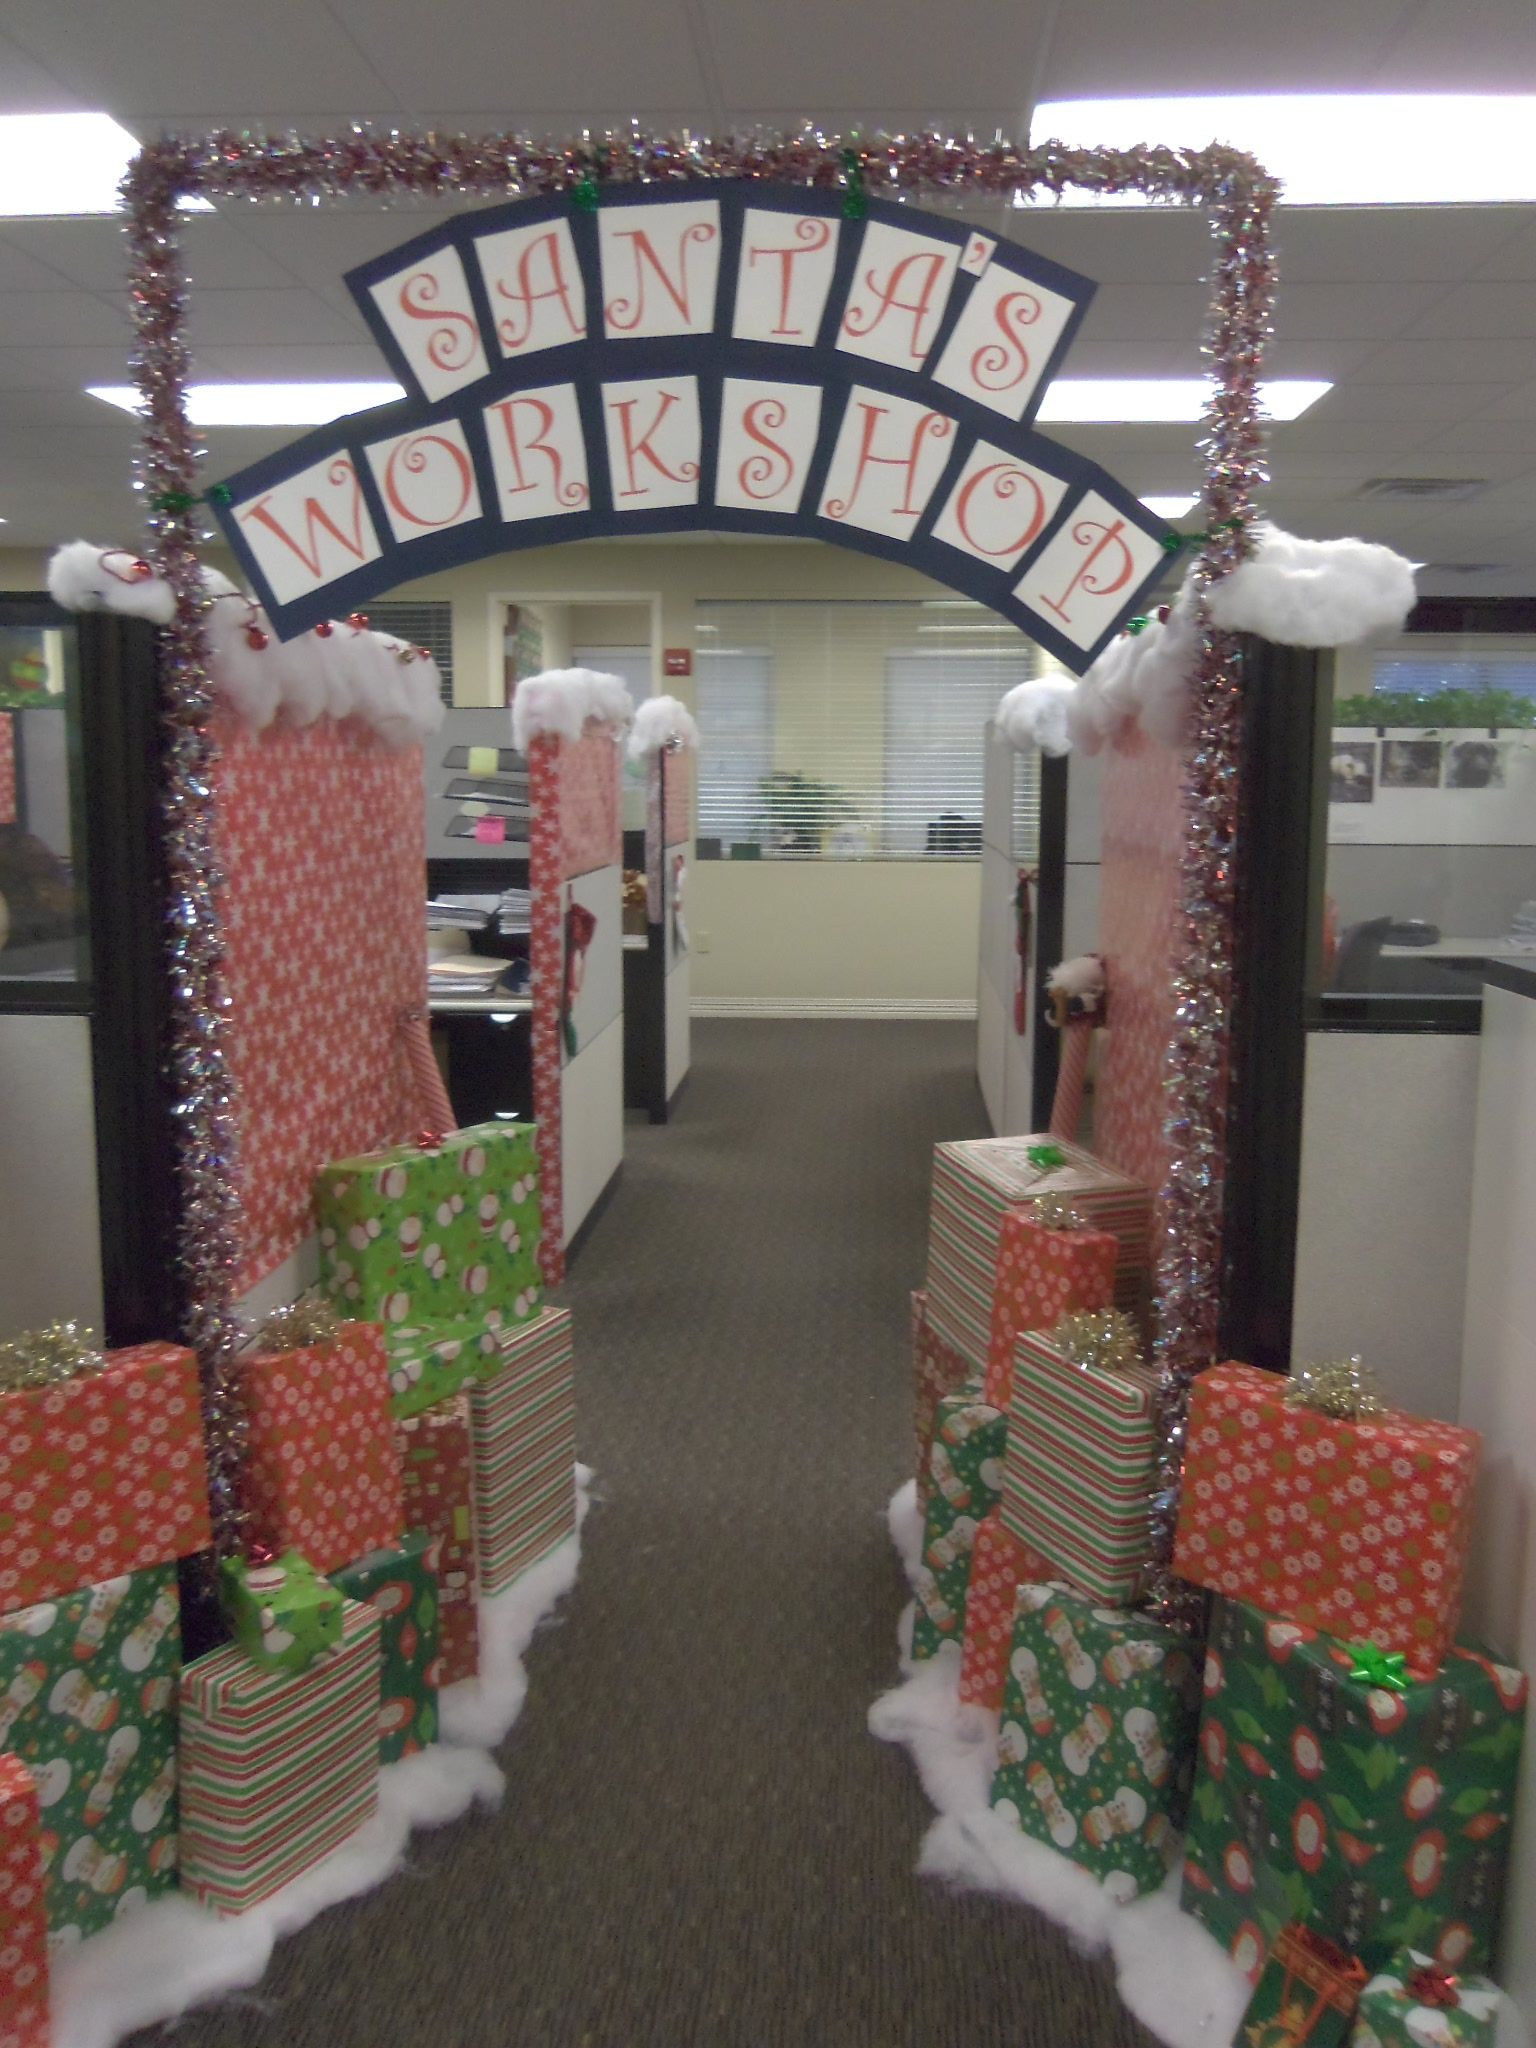 Christmas Party Ideas For Work
 Christmas decorations can boost morale at the office